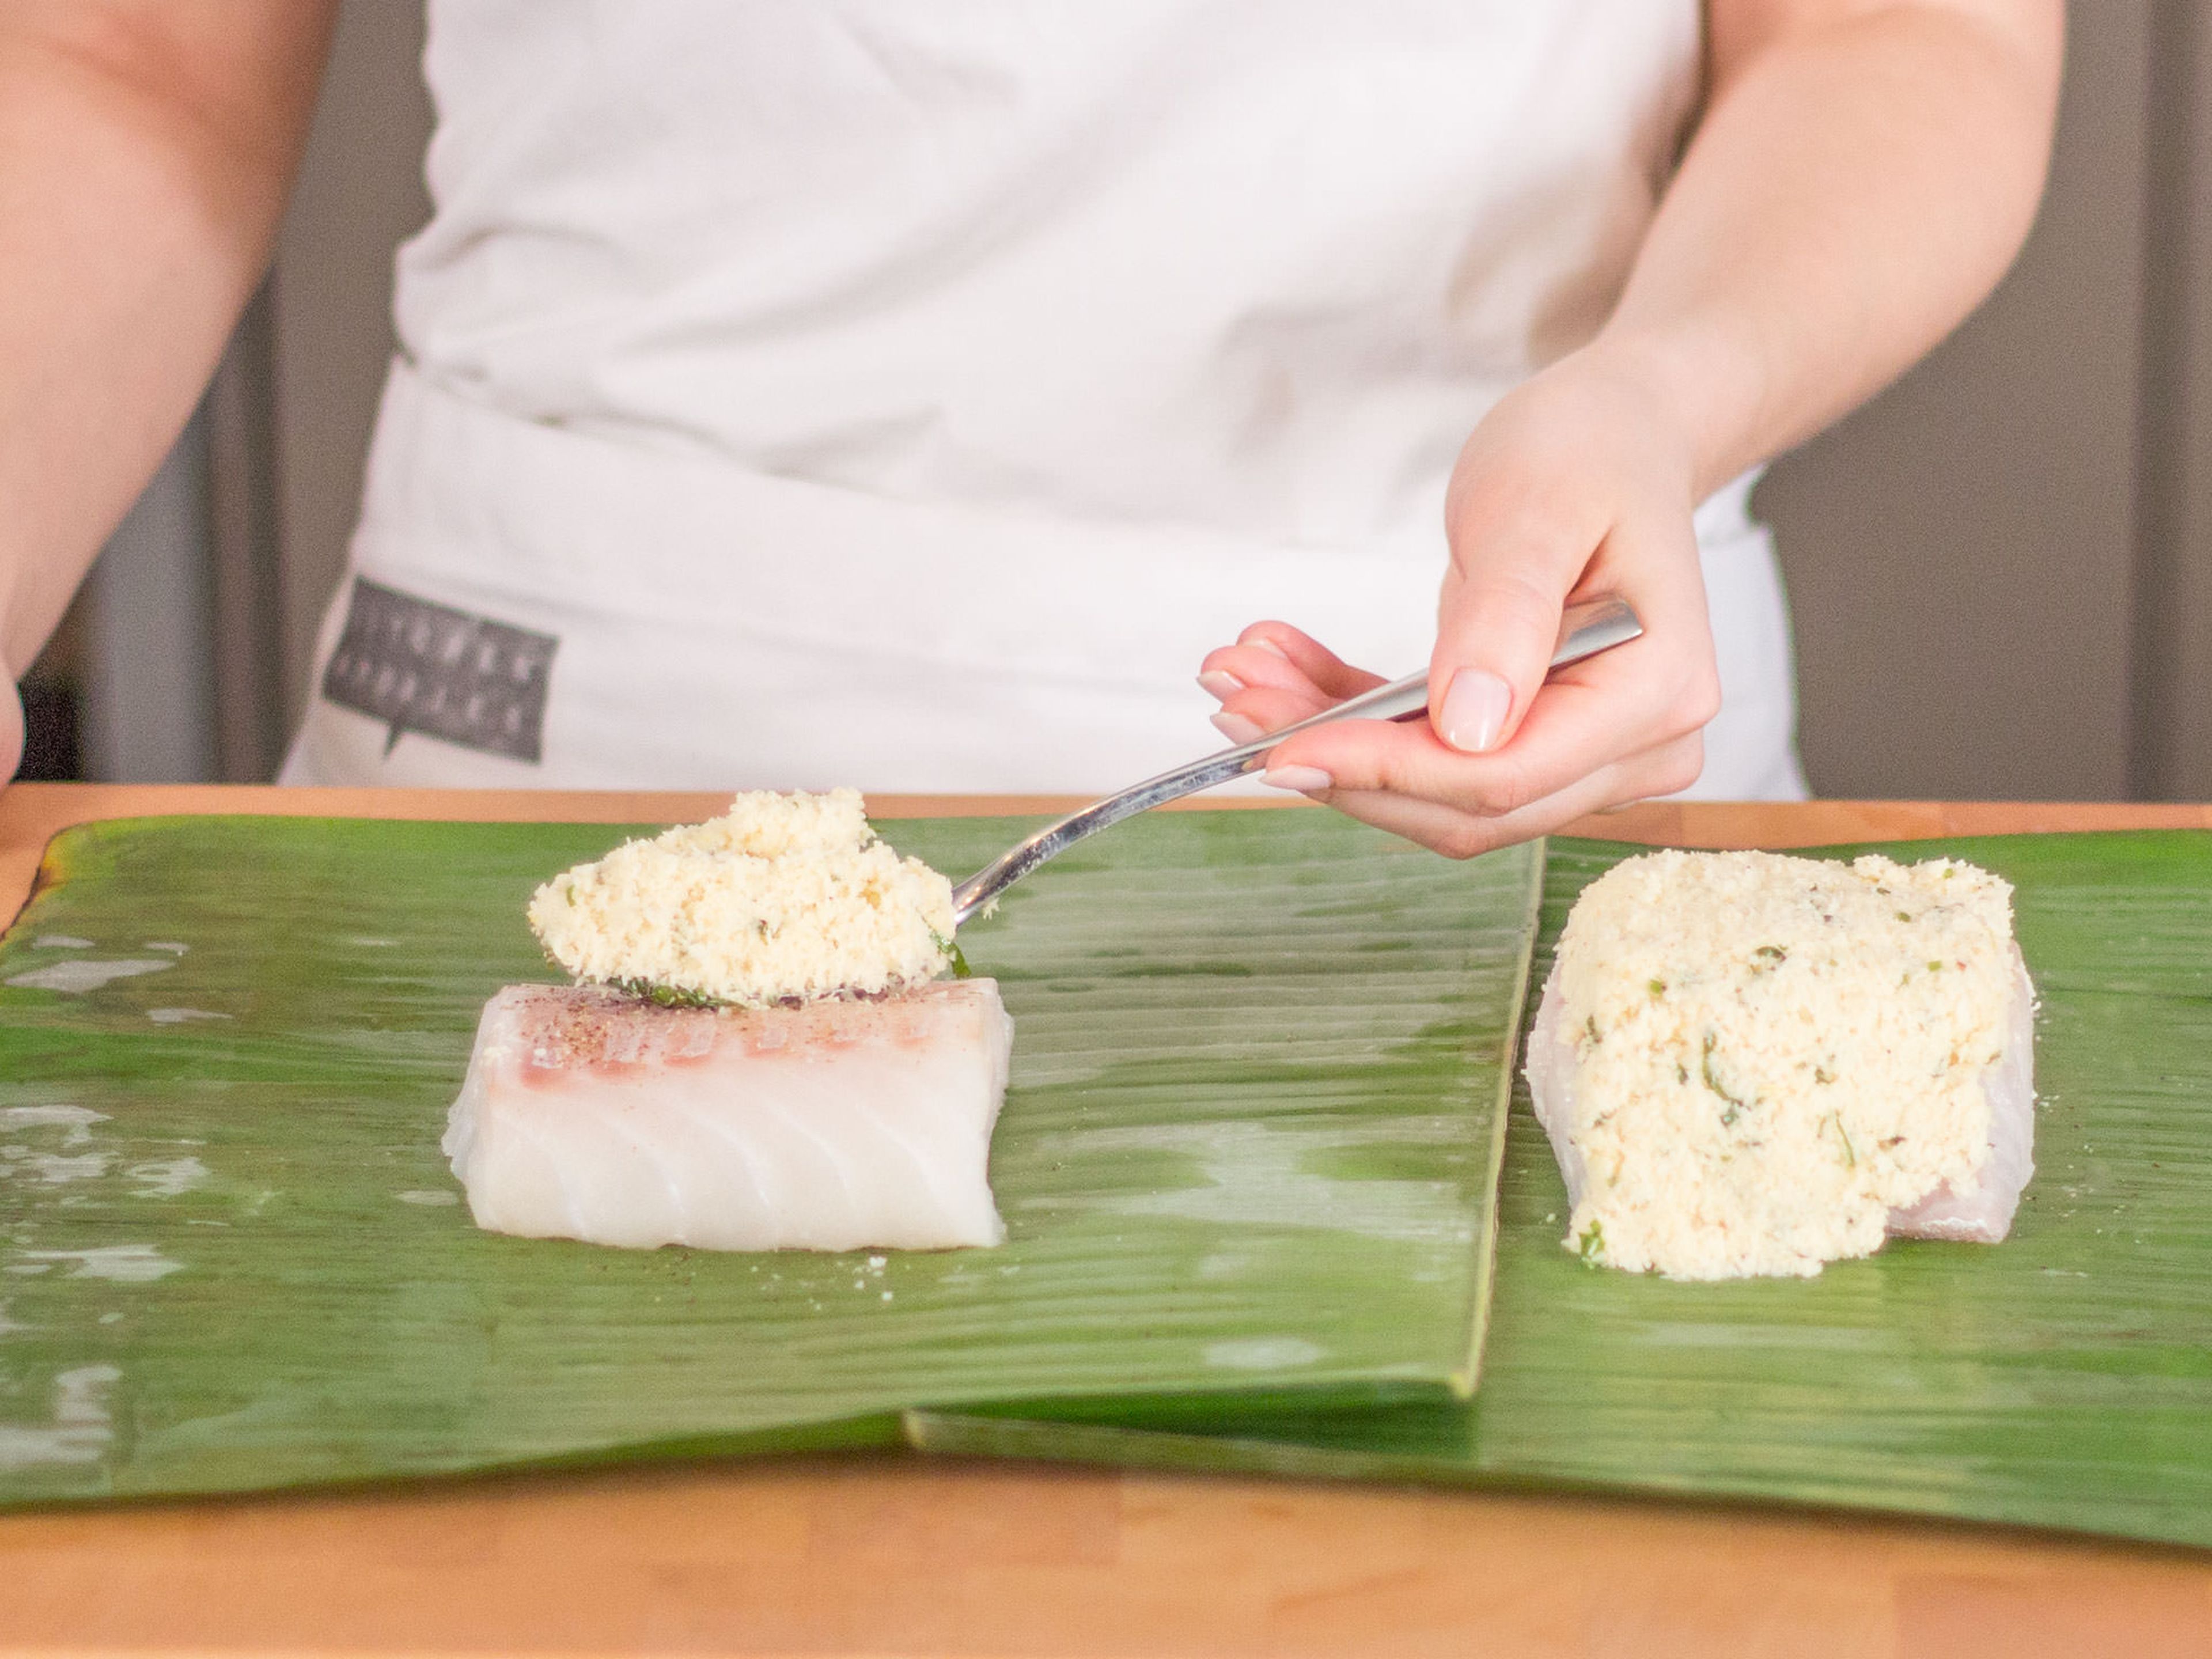 Season each cod fillet with salt and pepper and transfer to the middle of a banana leaf. Cover with coconut mixture.